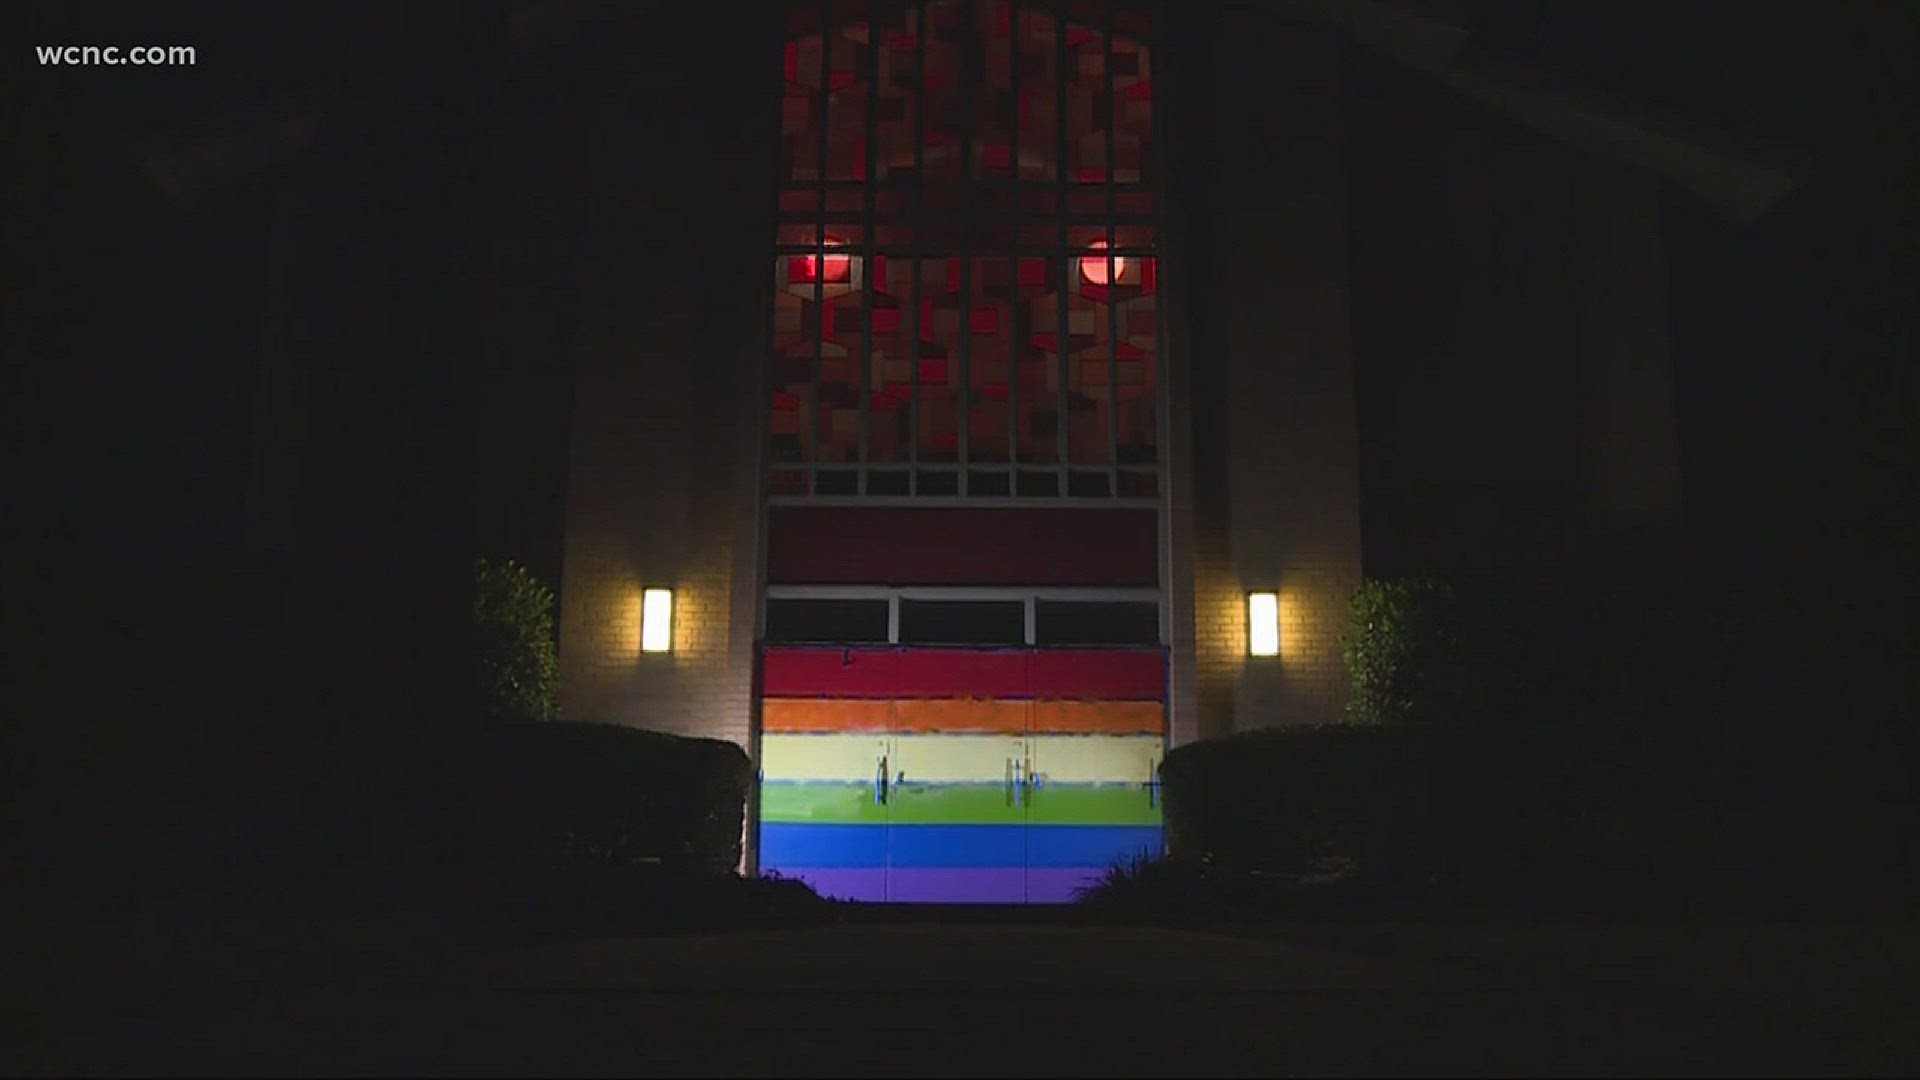 Authorities are still searching for the suspect who vandalized a south Charlotte church.